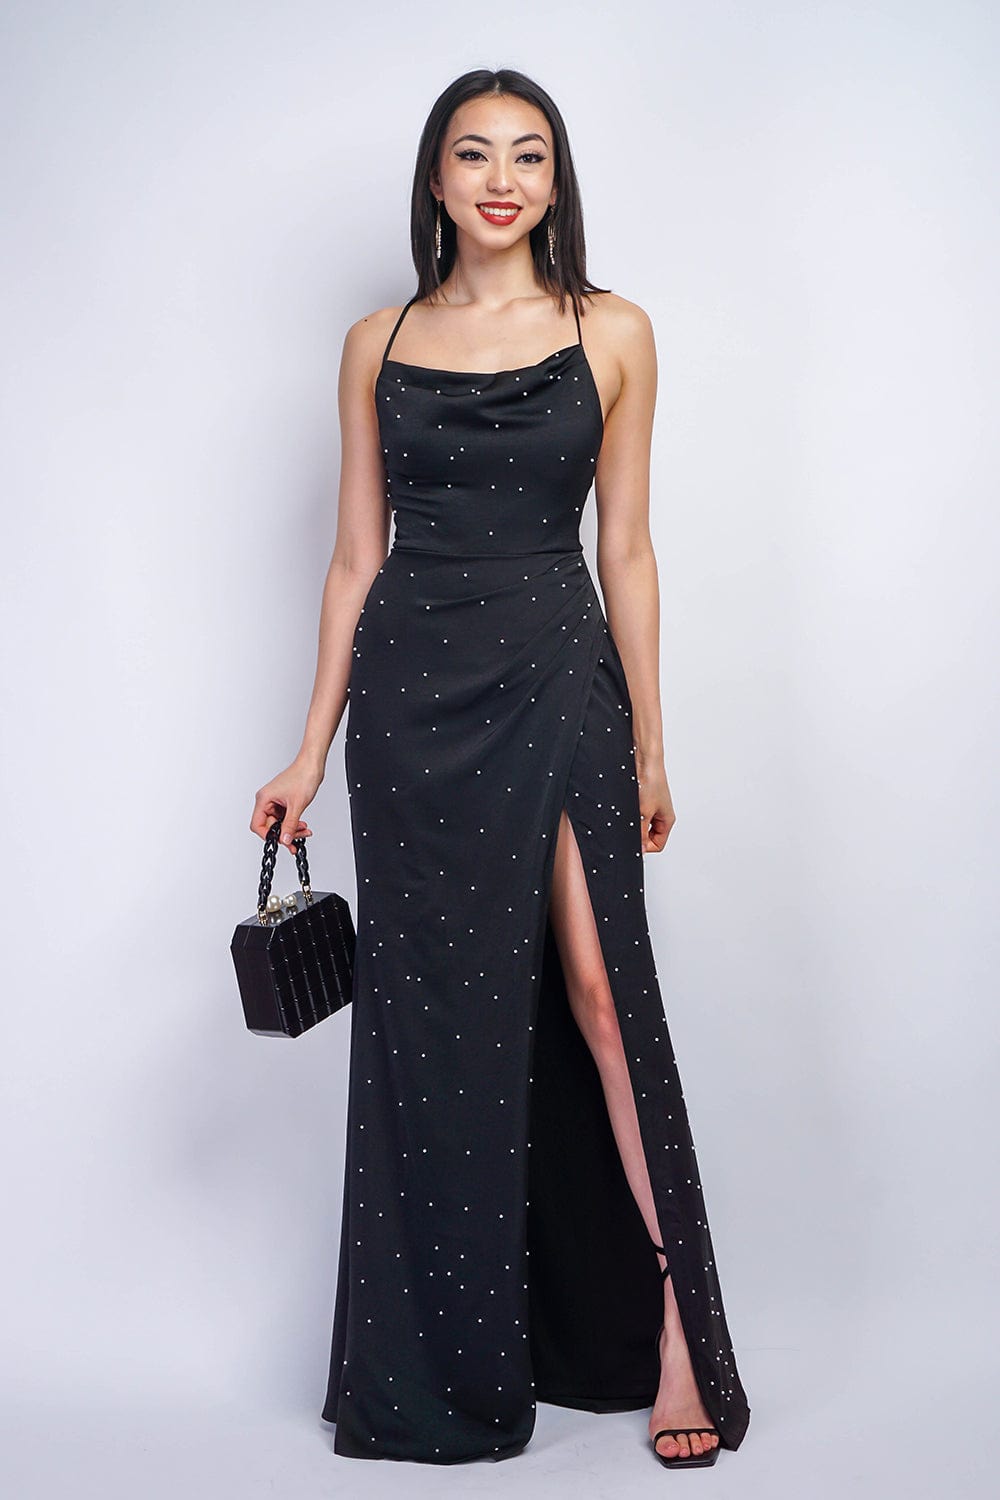 GOWNS Black Pearl Cowl Gown - Chloe Dao